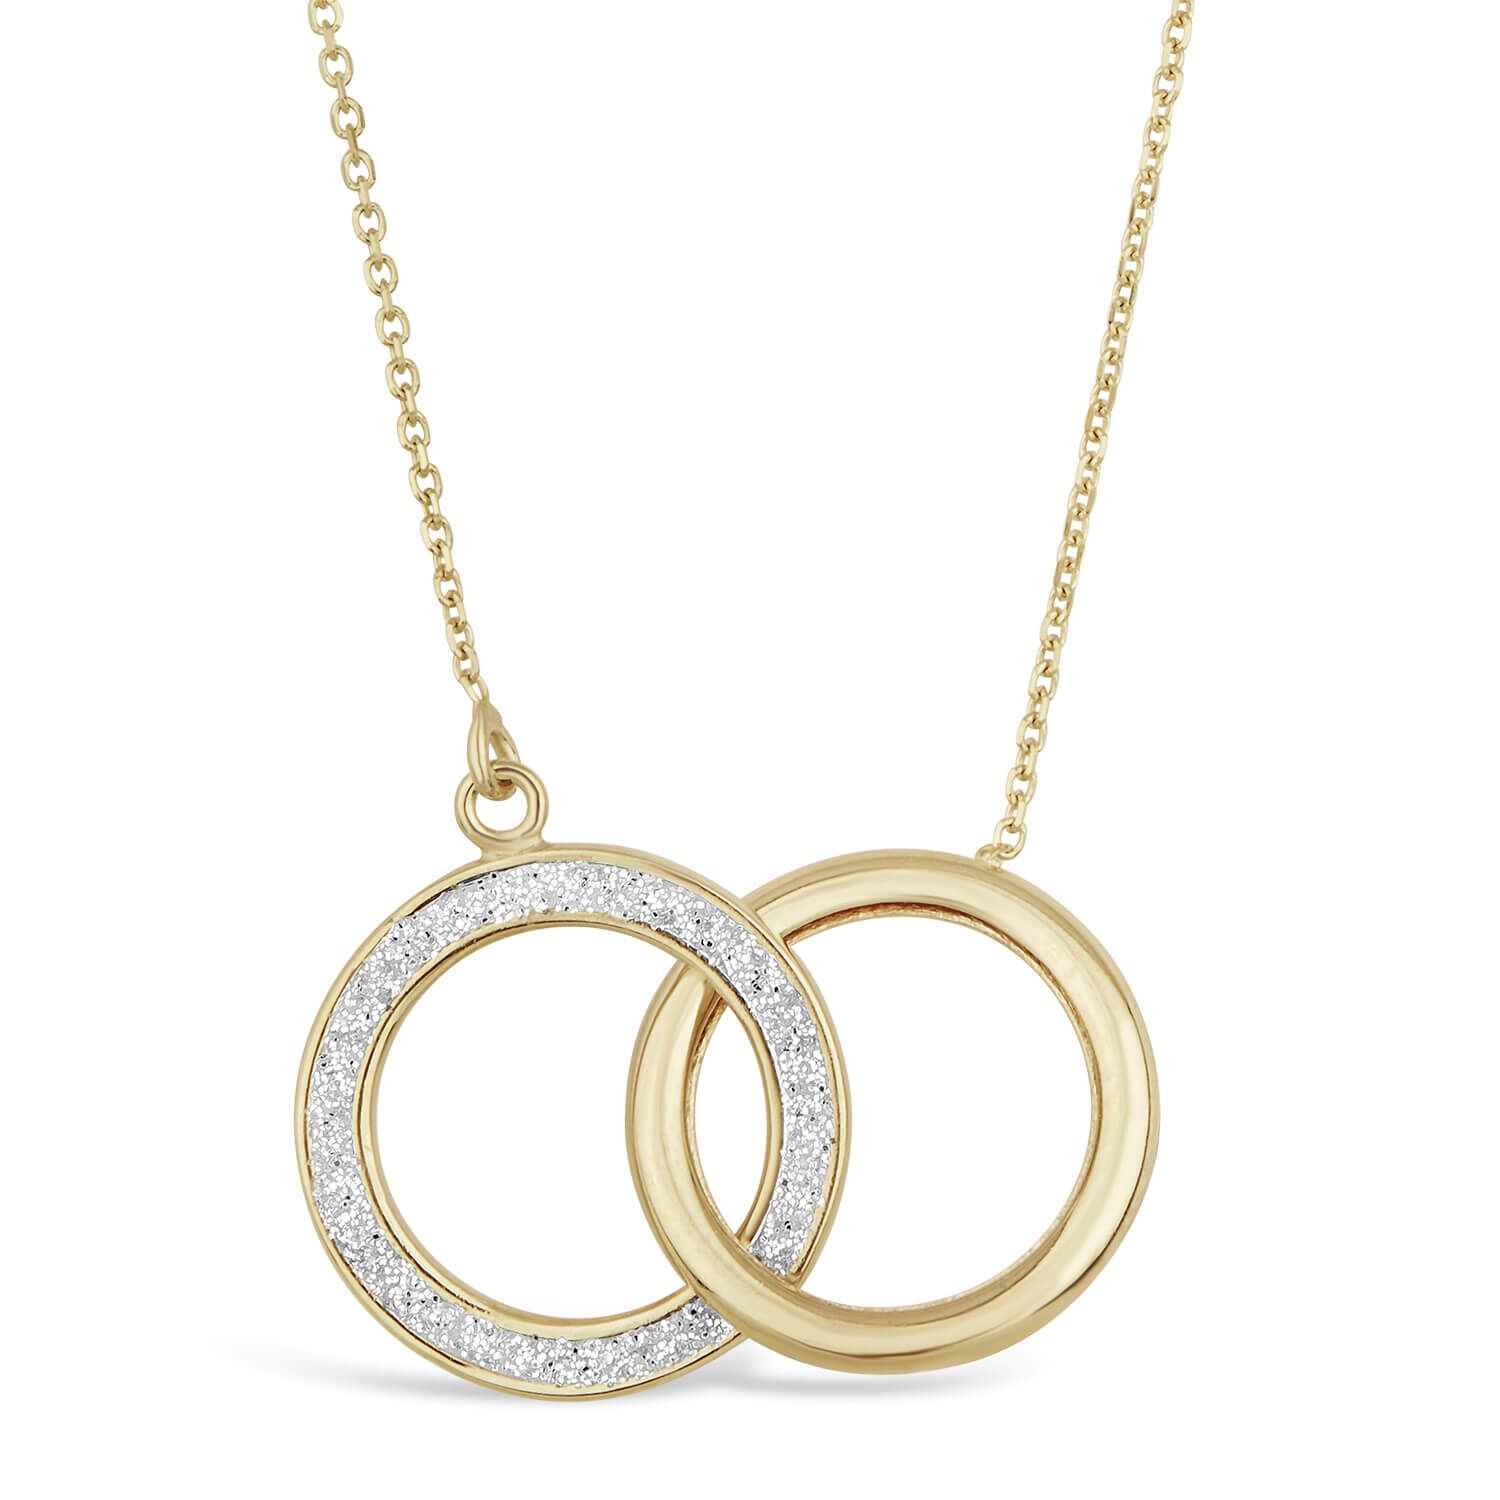 Two Entwined Tiny Circles Necklace in Sterling Silver or Gold Fill - Etsy